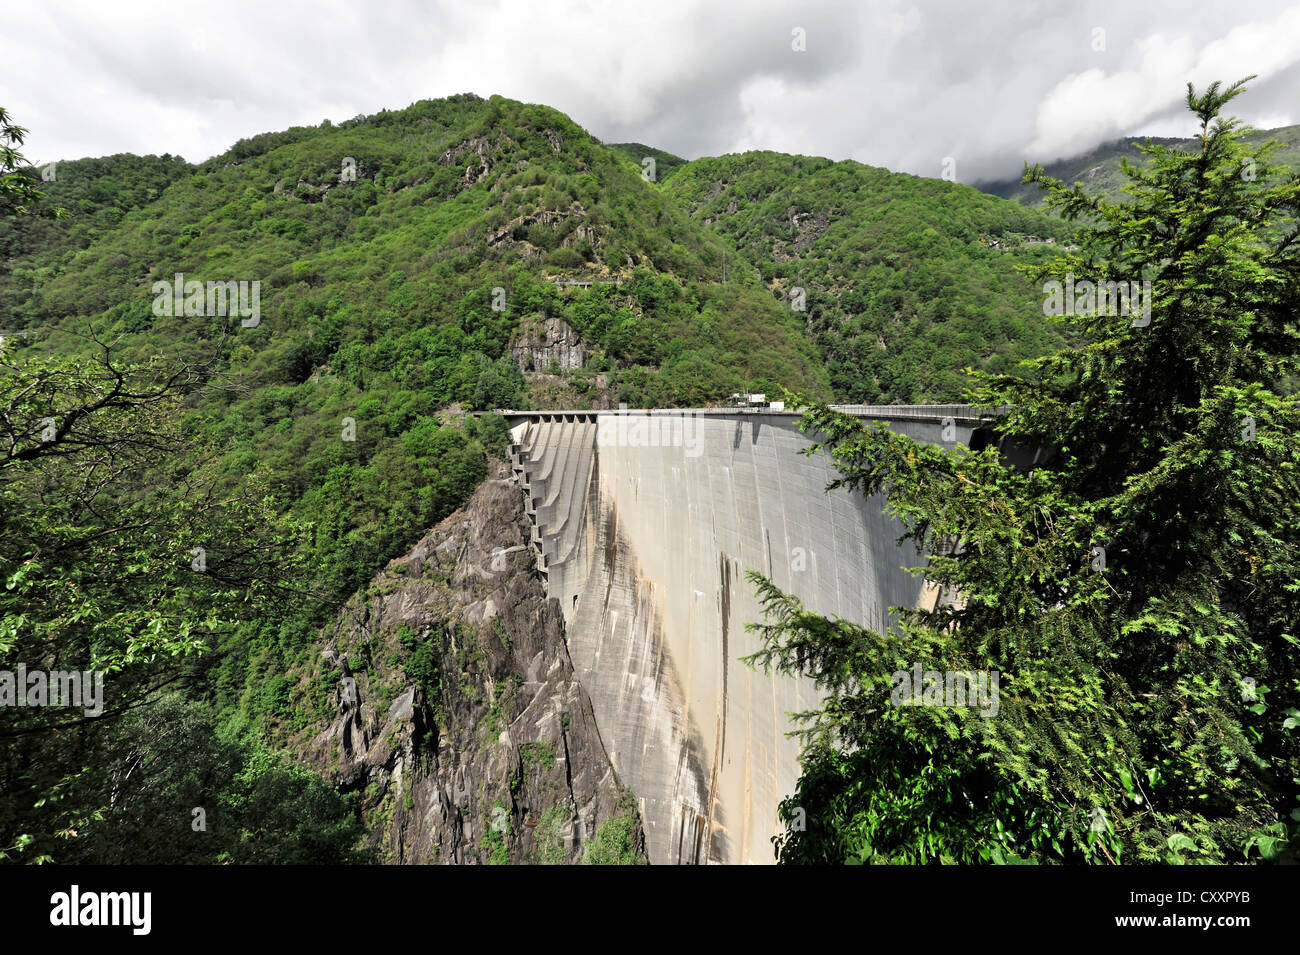 Contra-dam wall with overflows on the sides, site of James Bond's bungee jump in the film Goldeneye, a diving platform in the Stock Photo